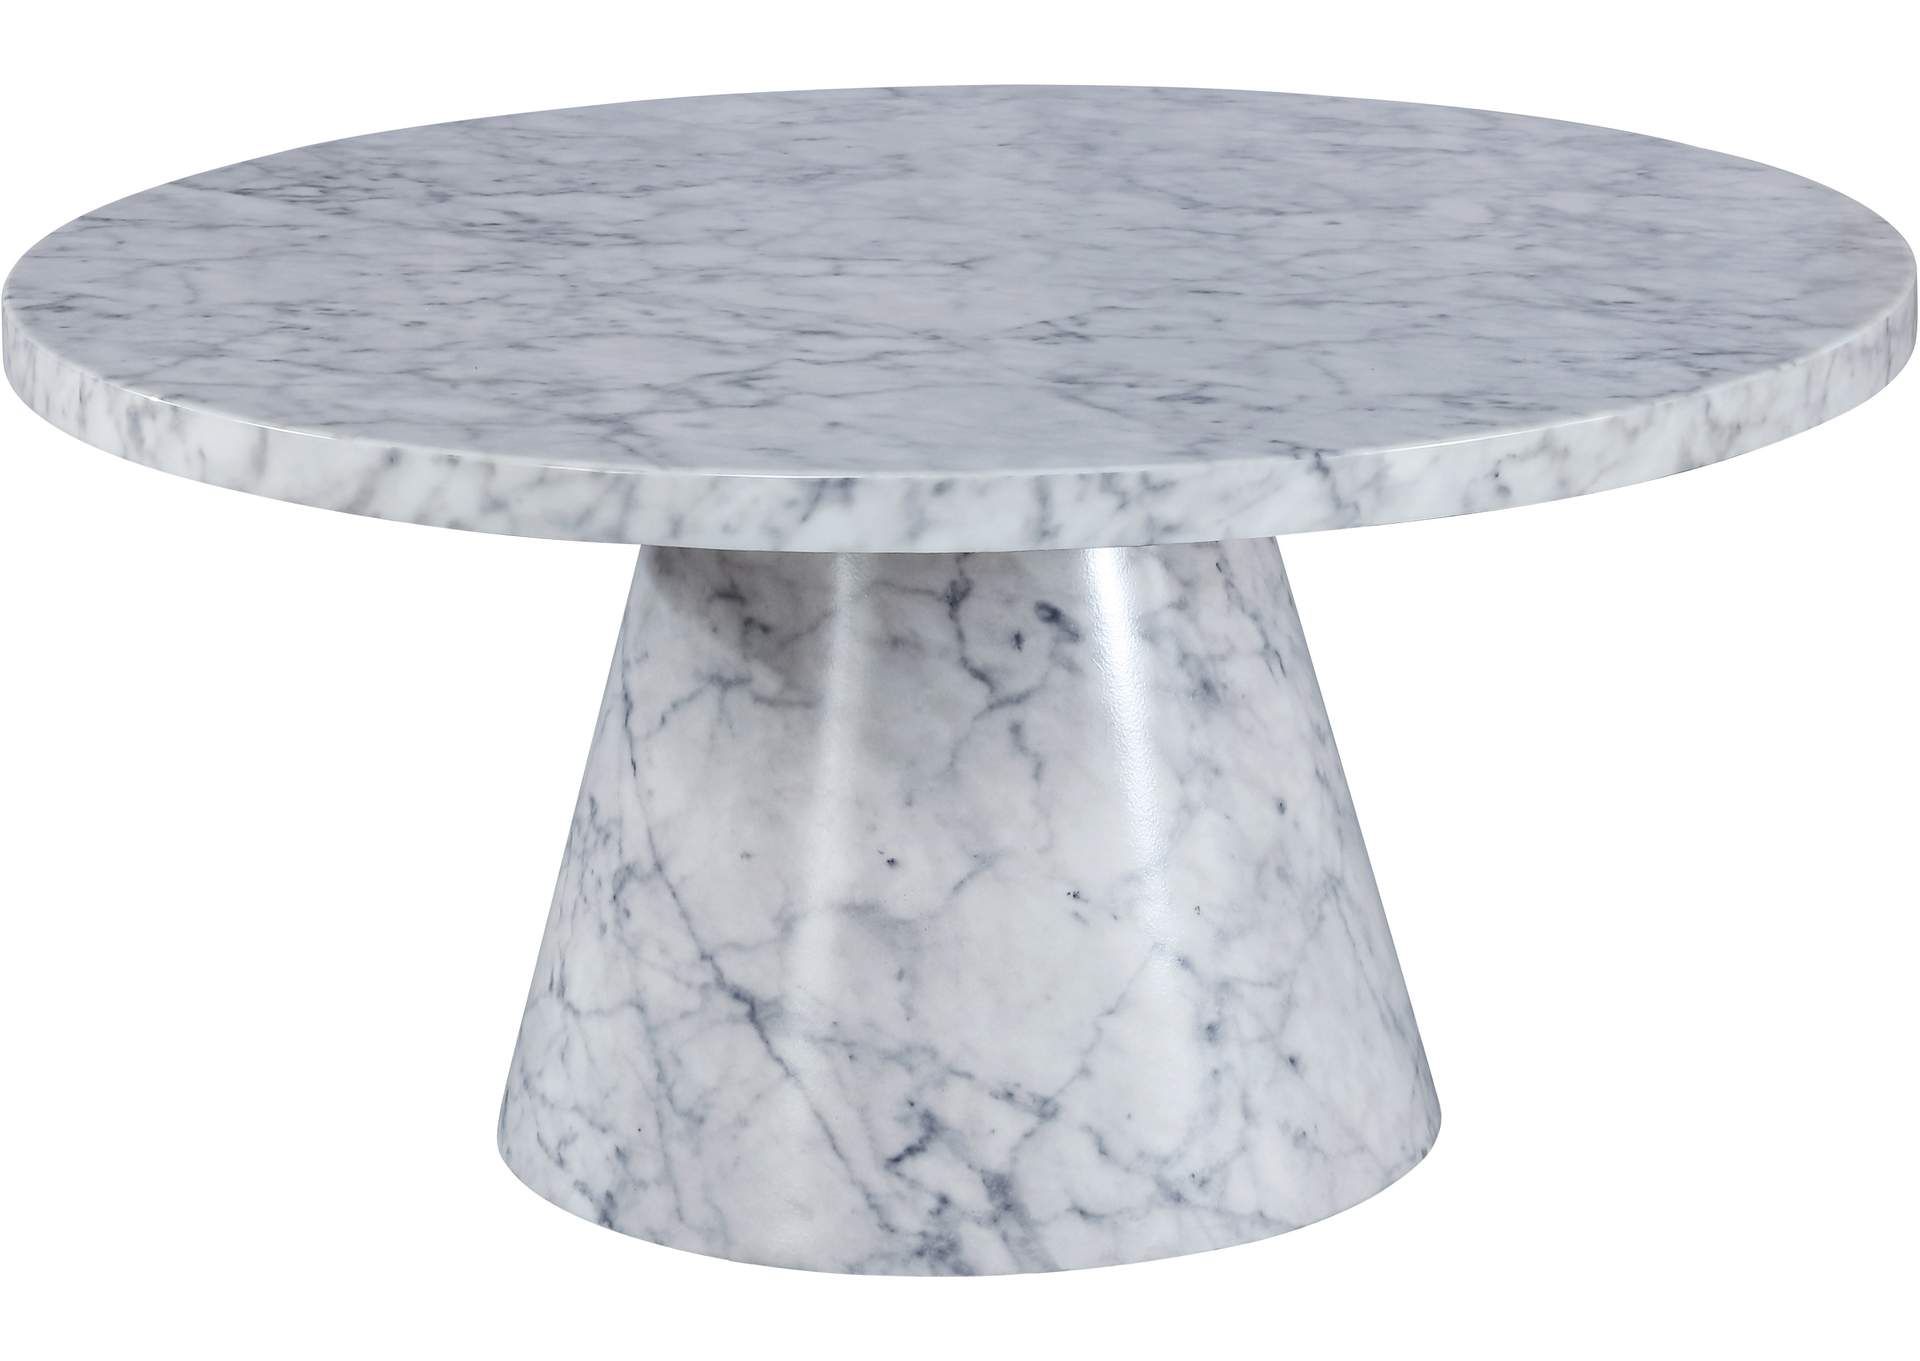 White Faux Marble Outdoor Tables Within 2019 Omni White Faux Marble Coffee Table Best Buy Furniture And Mattress (View 3 of 15)